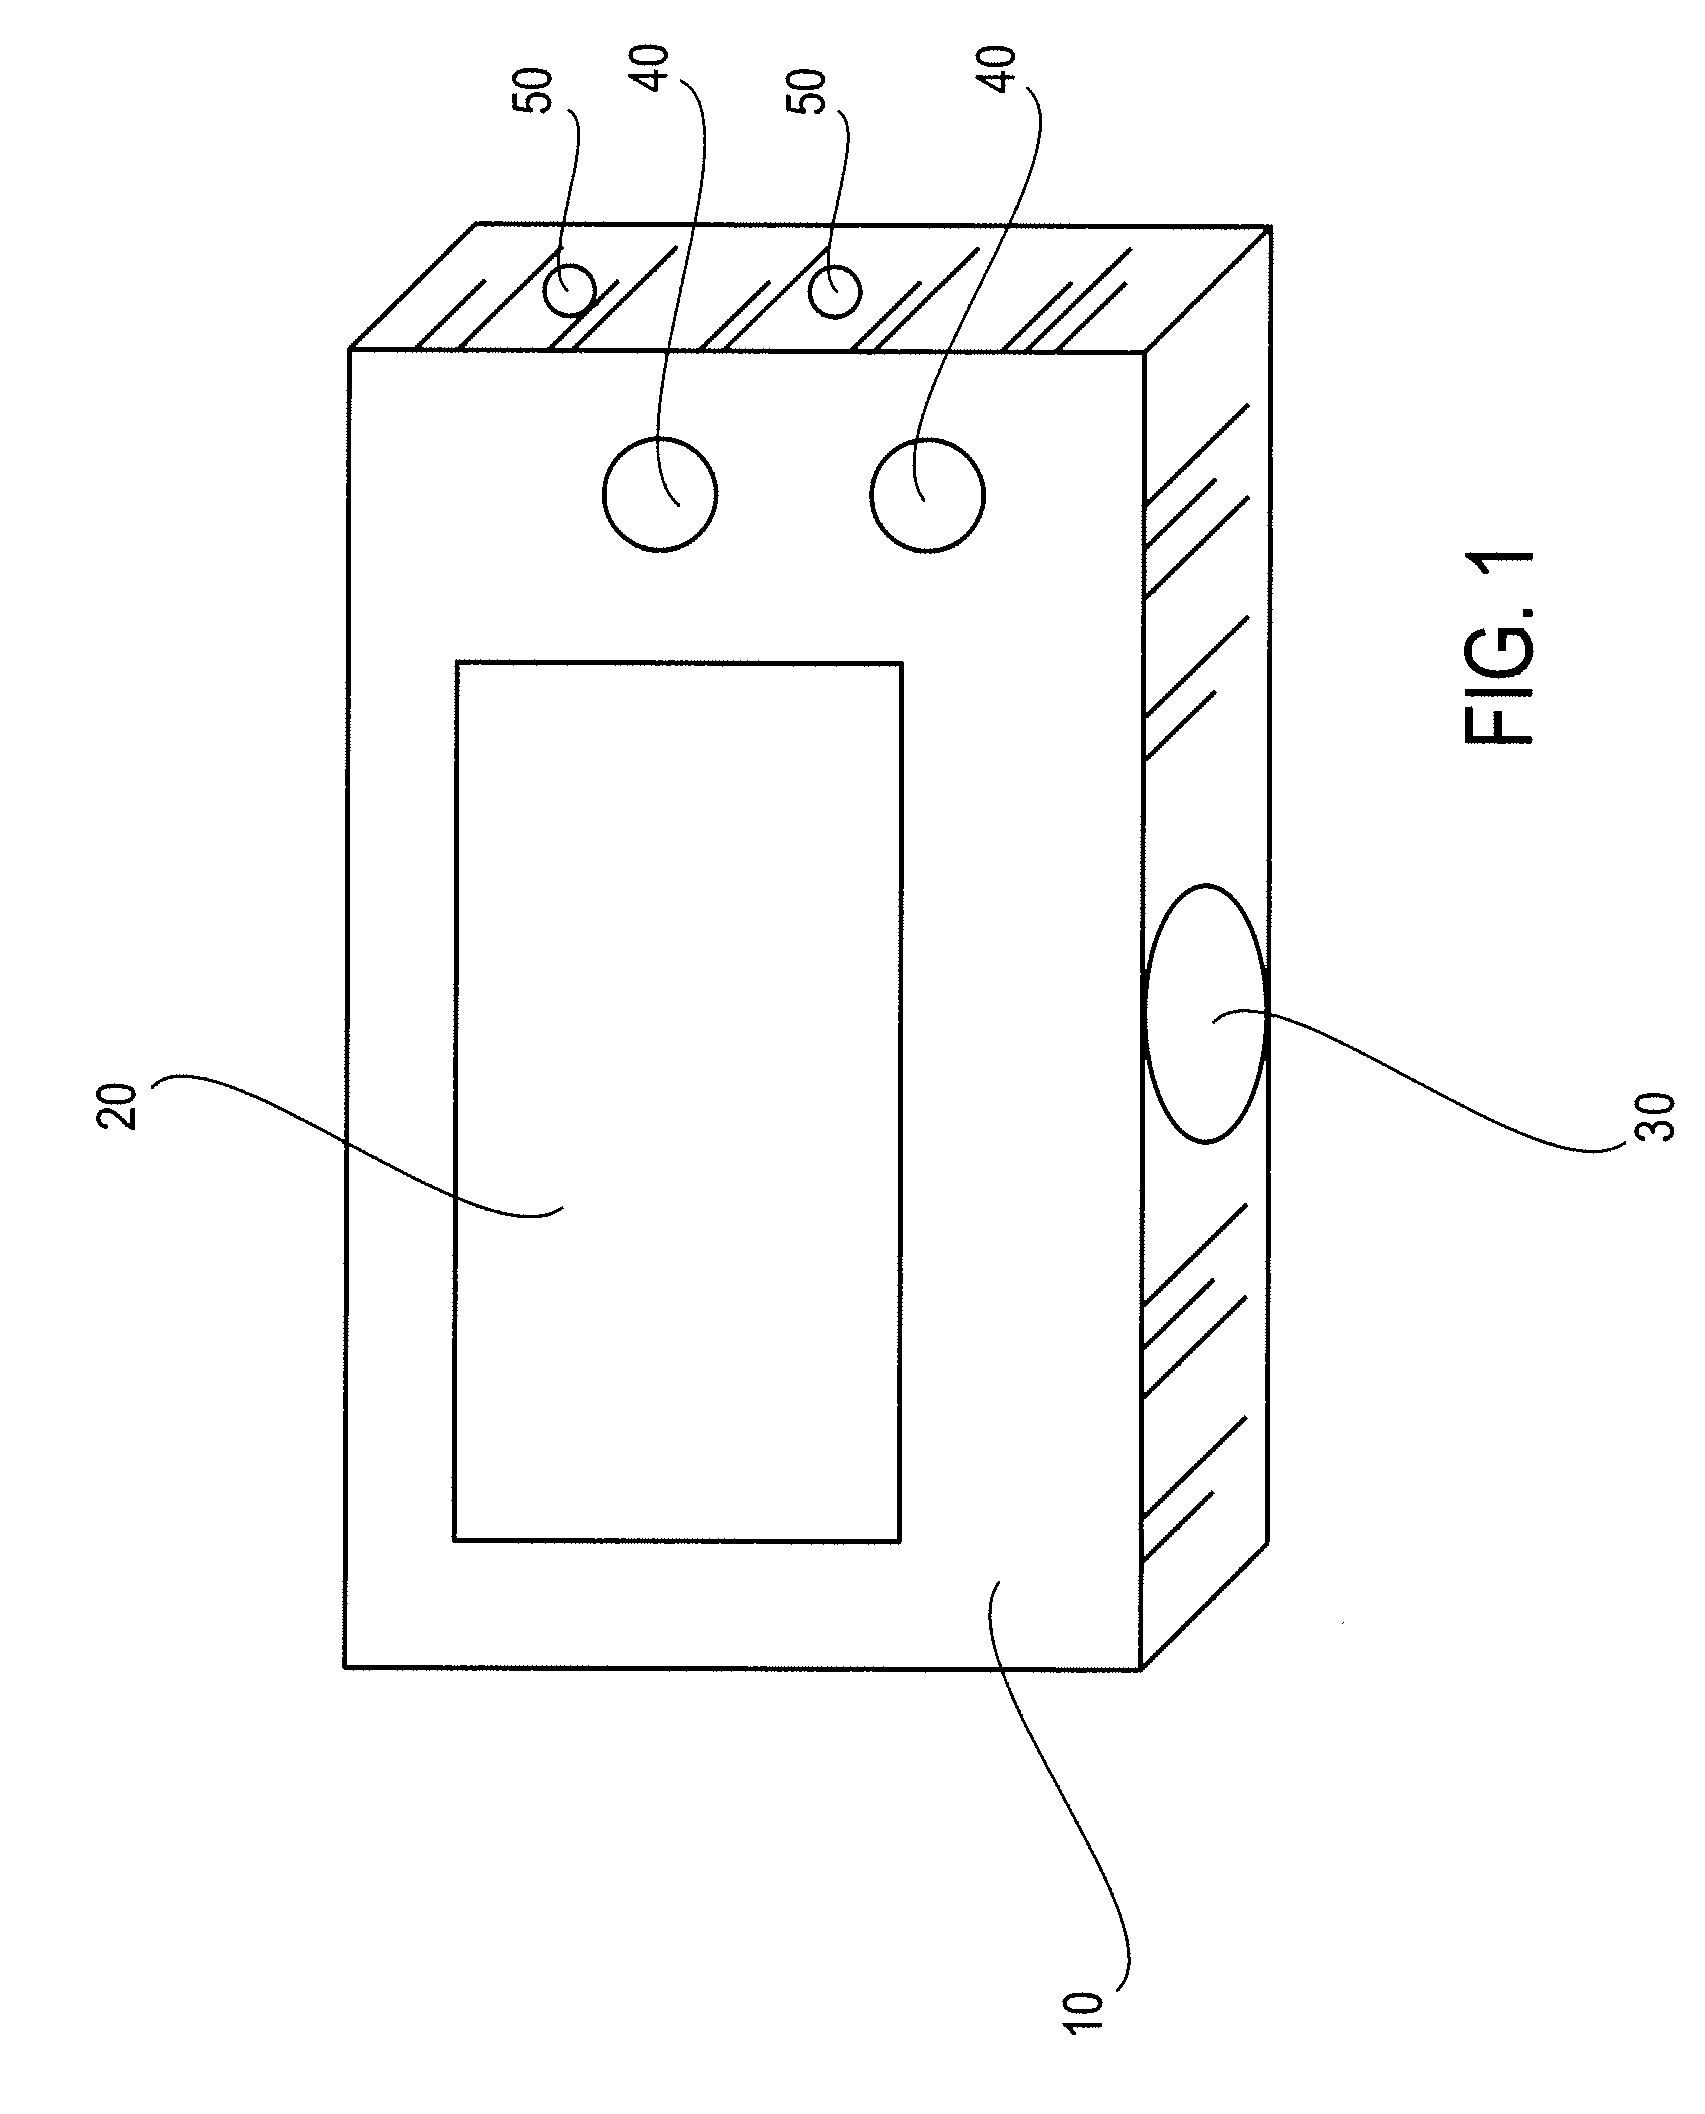 Text capture and presentation device